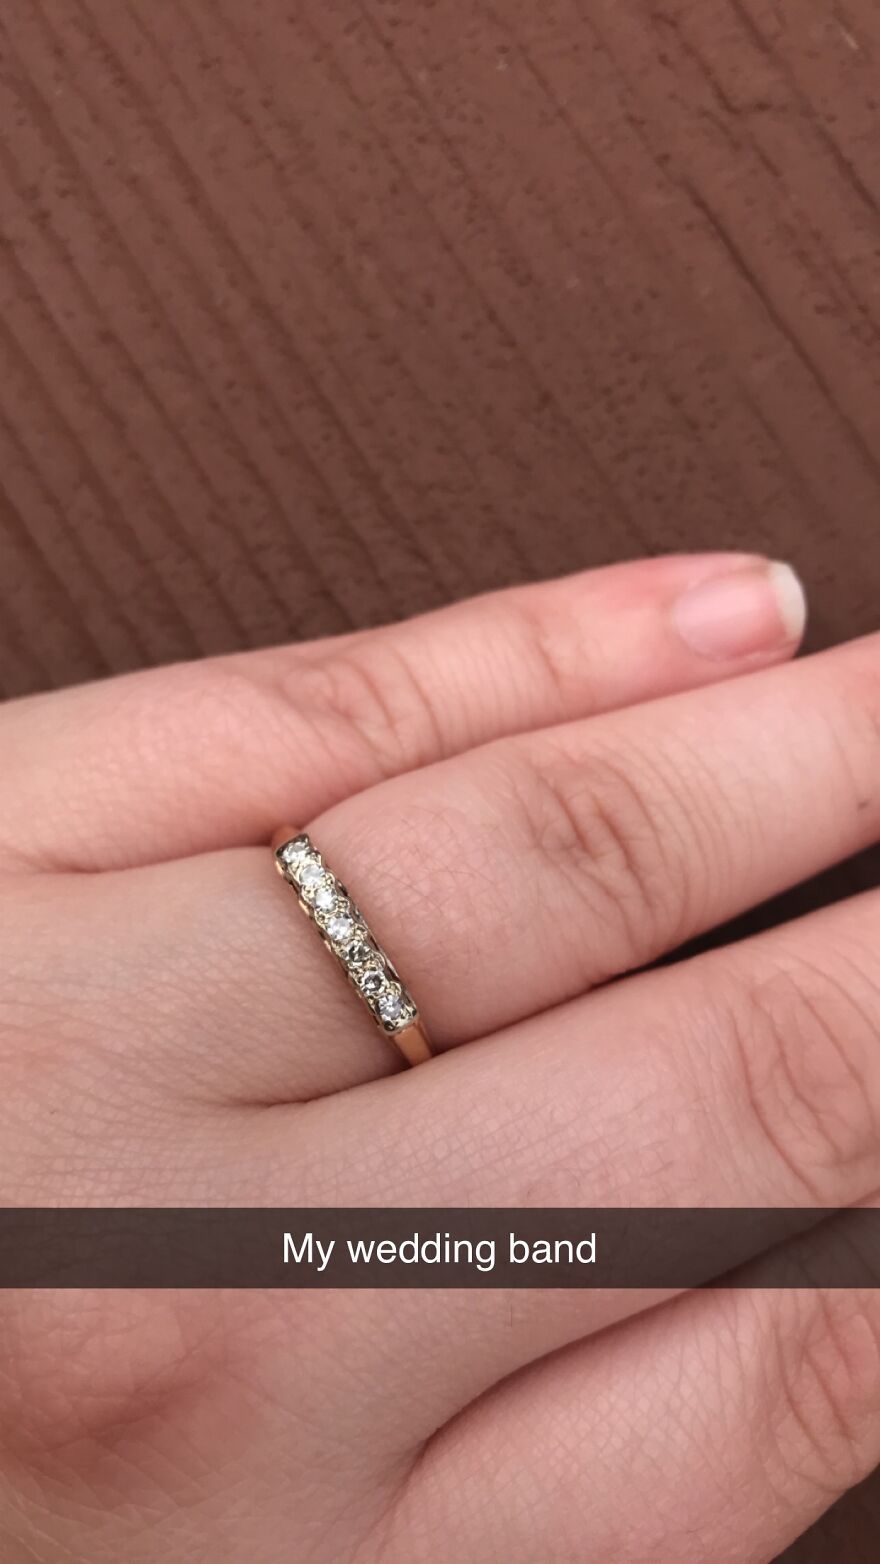 My Wedding Ring. My Husband Used His Grandmas Ring As My Wedding Band. After His Grandparents Where Married 40+ Yrs I Take It Has Our Good Luck From Them And Their Blessing. Lucky To Keep The Love Tradition Alive!